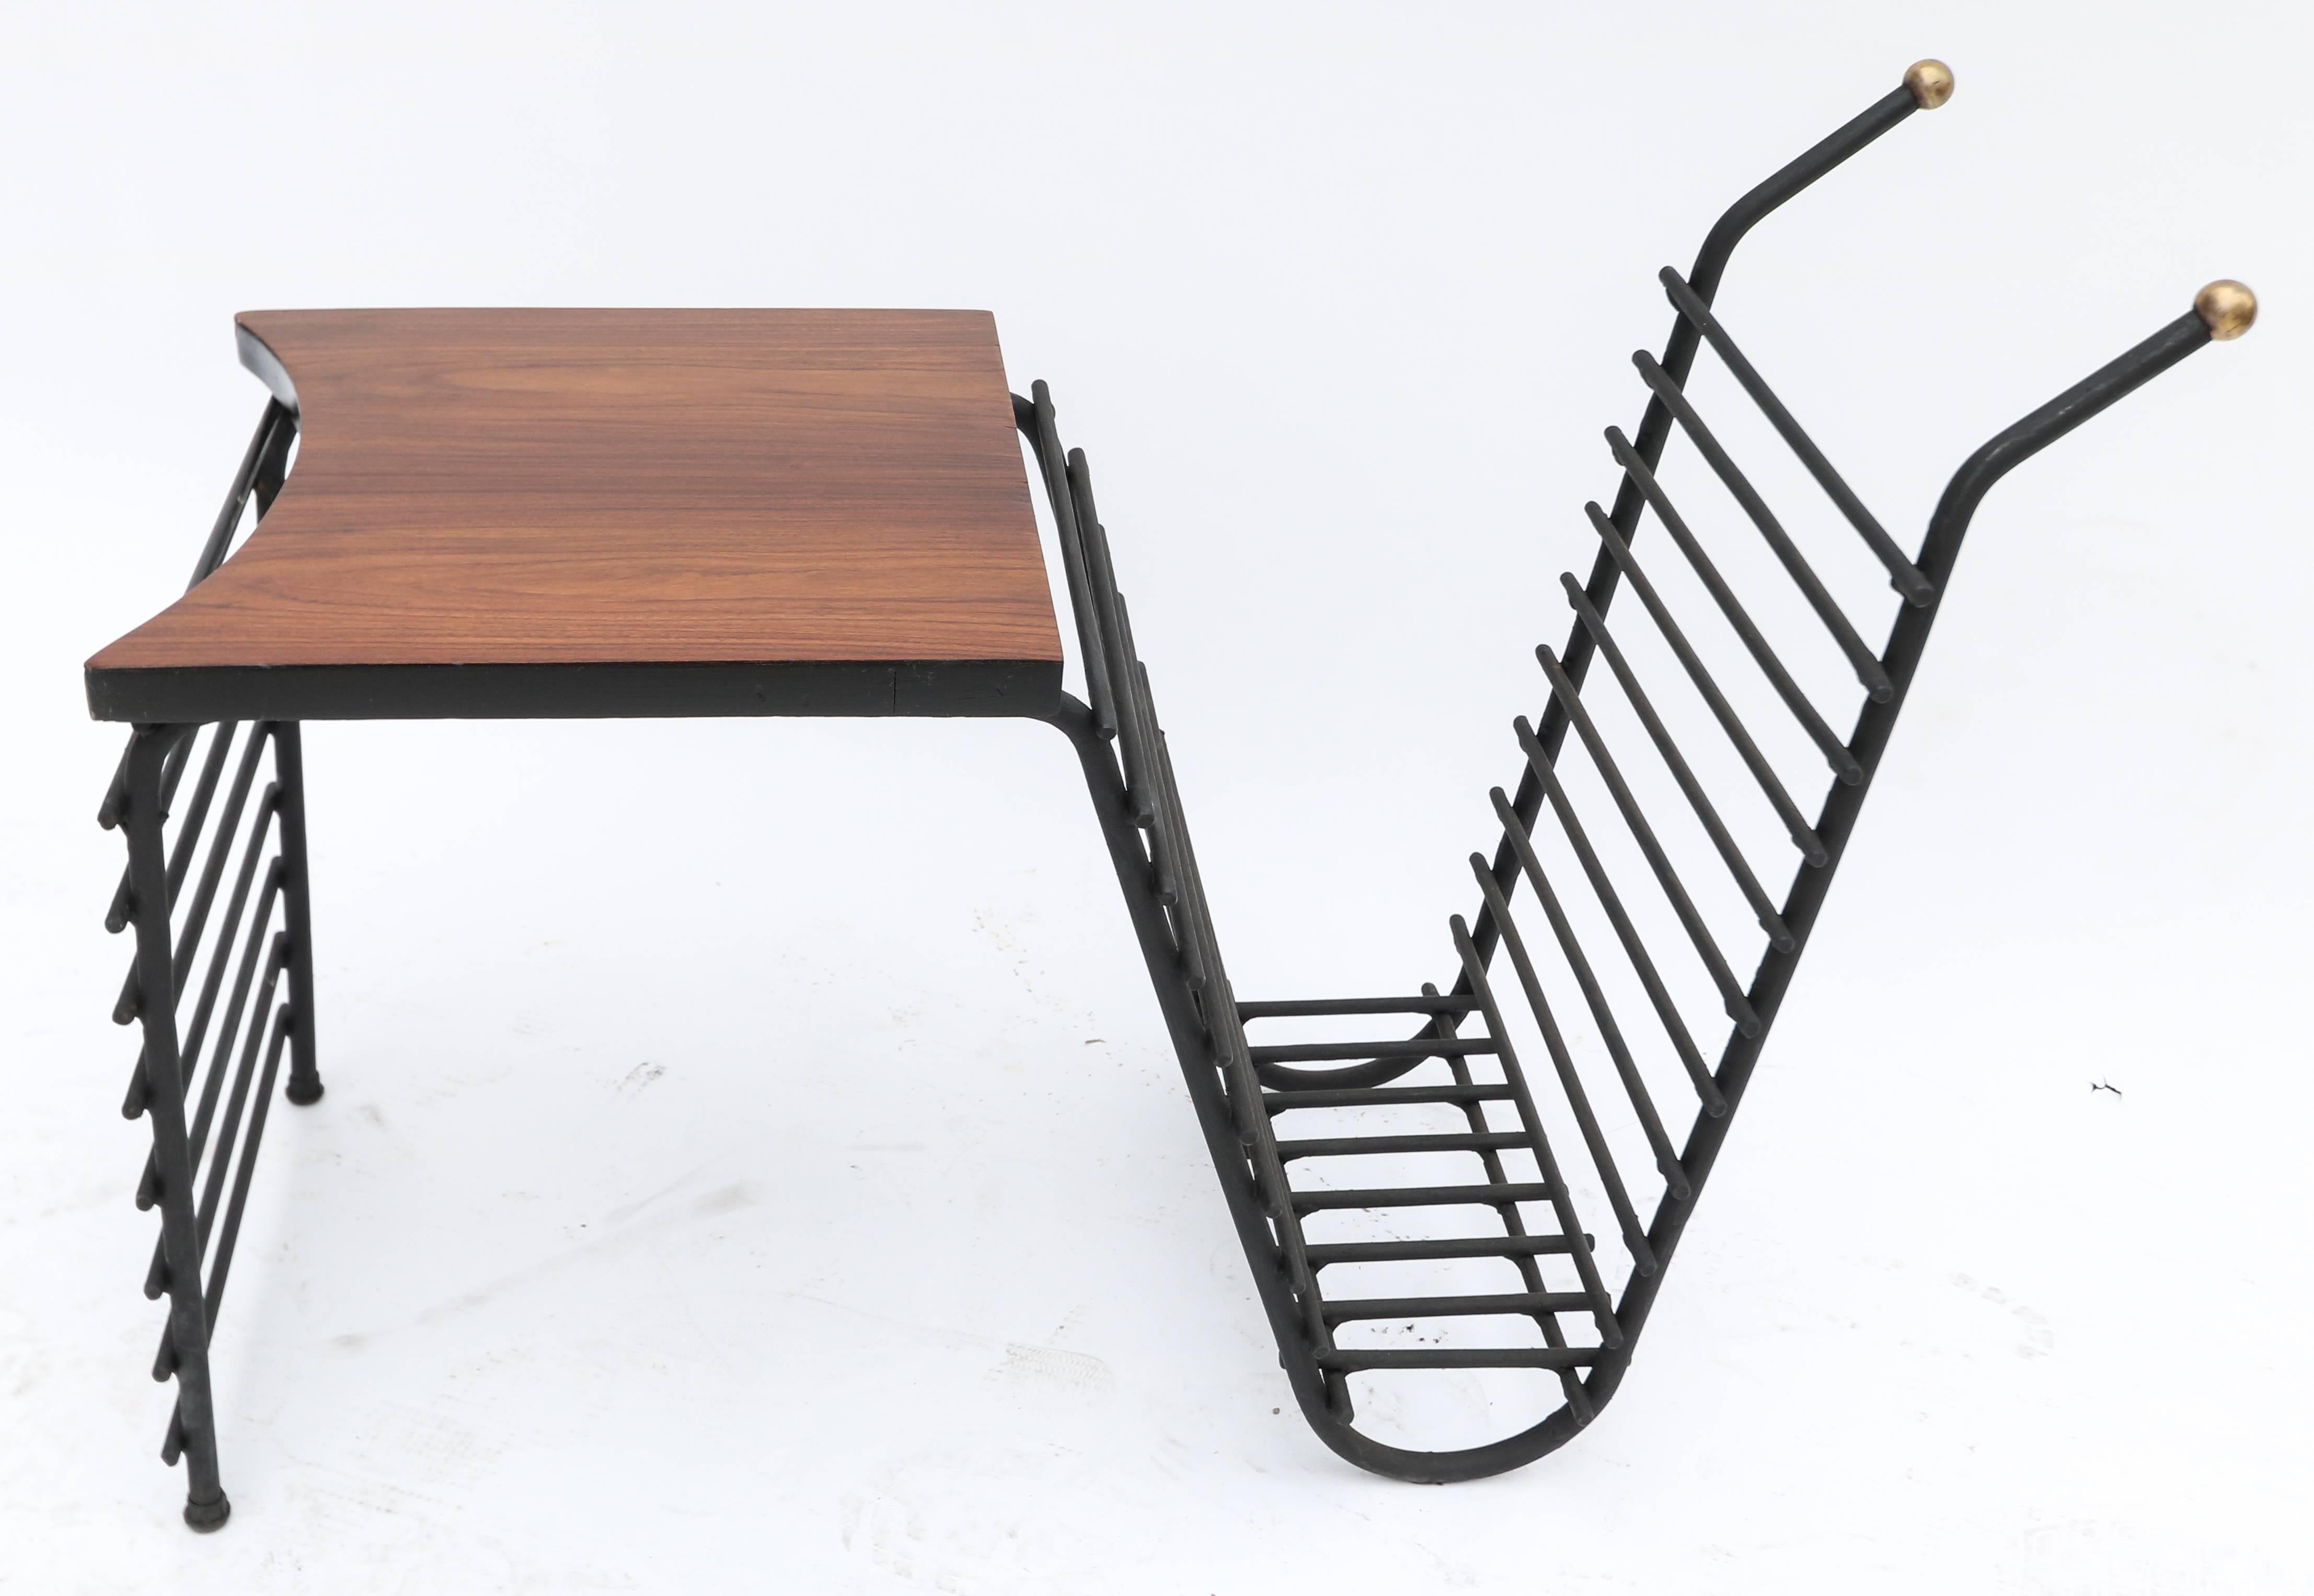 1960s Side table and magazine rack in black metal with brass finials and jacaranda wood top.

Measures: table height 16